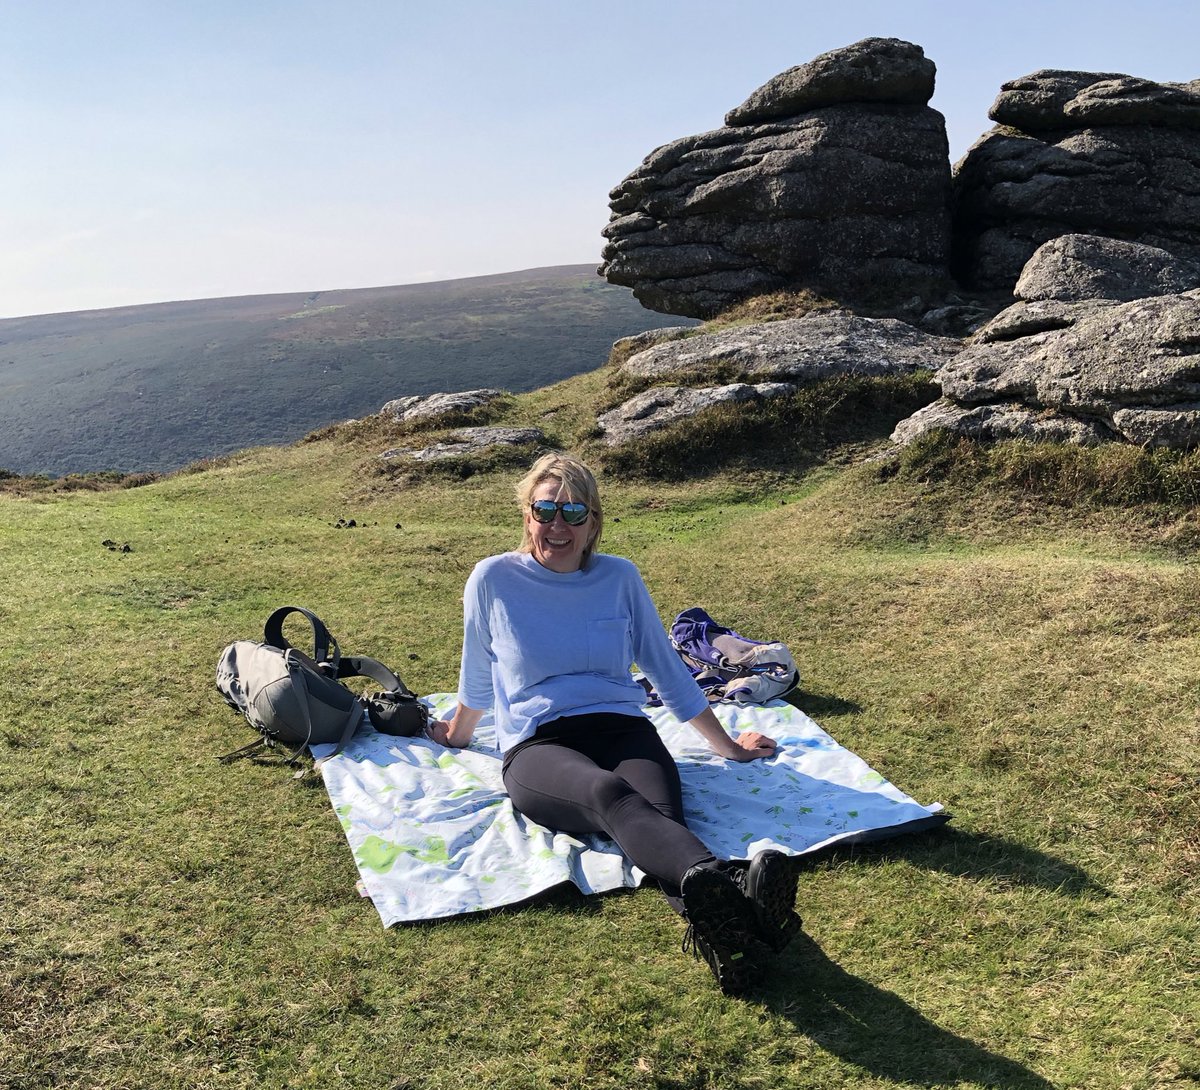 A week ago today we were at Widecombe Fair. A very good, but very wet day. The day after when the sun came out. It was just perfect.

Our Dartmoor PACMAT is back in stock 

#dartmoor #dartmoornationalpark #devon #dartmoordays #dartmoorwalking #dartmoortor #tor #devondays #walk